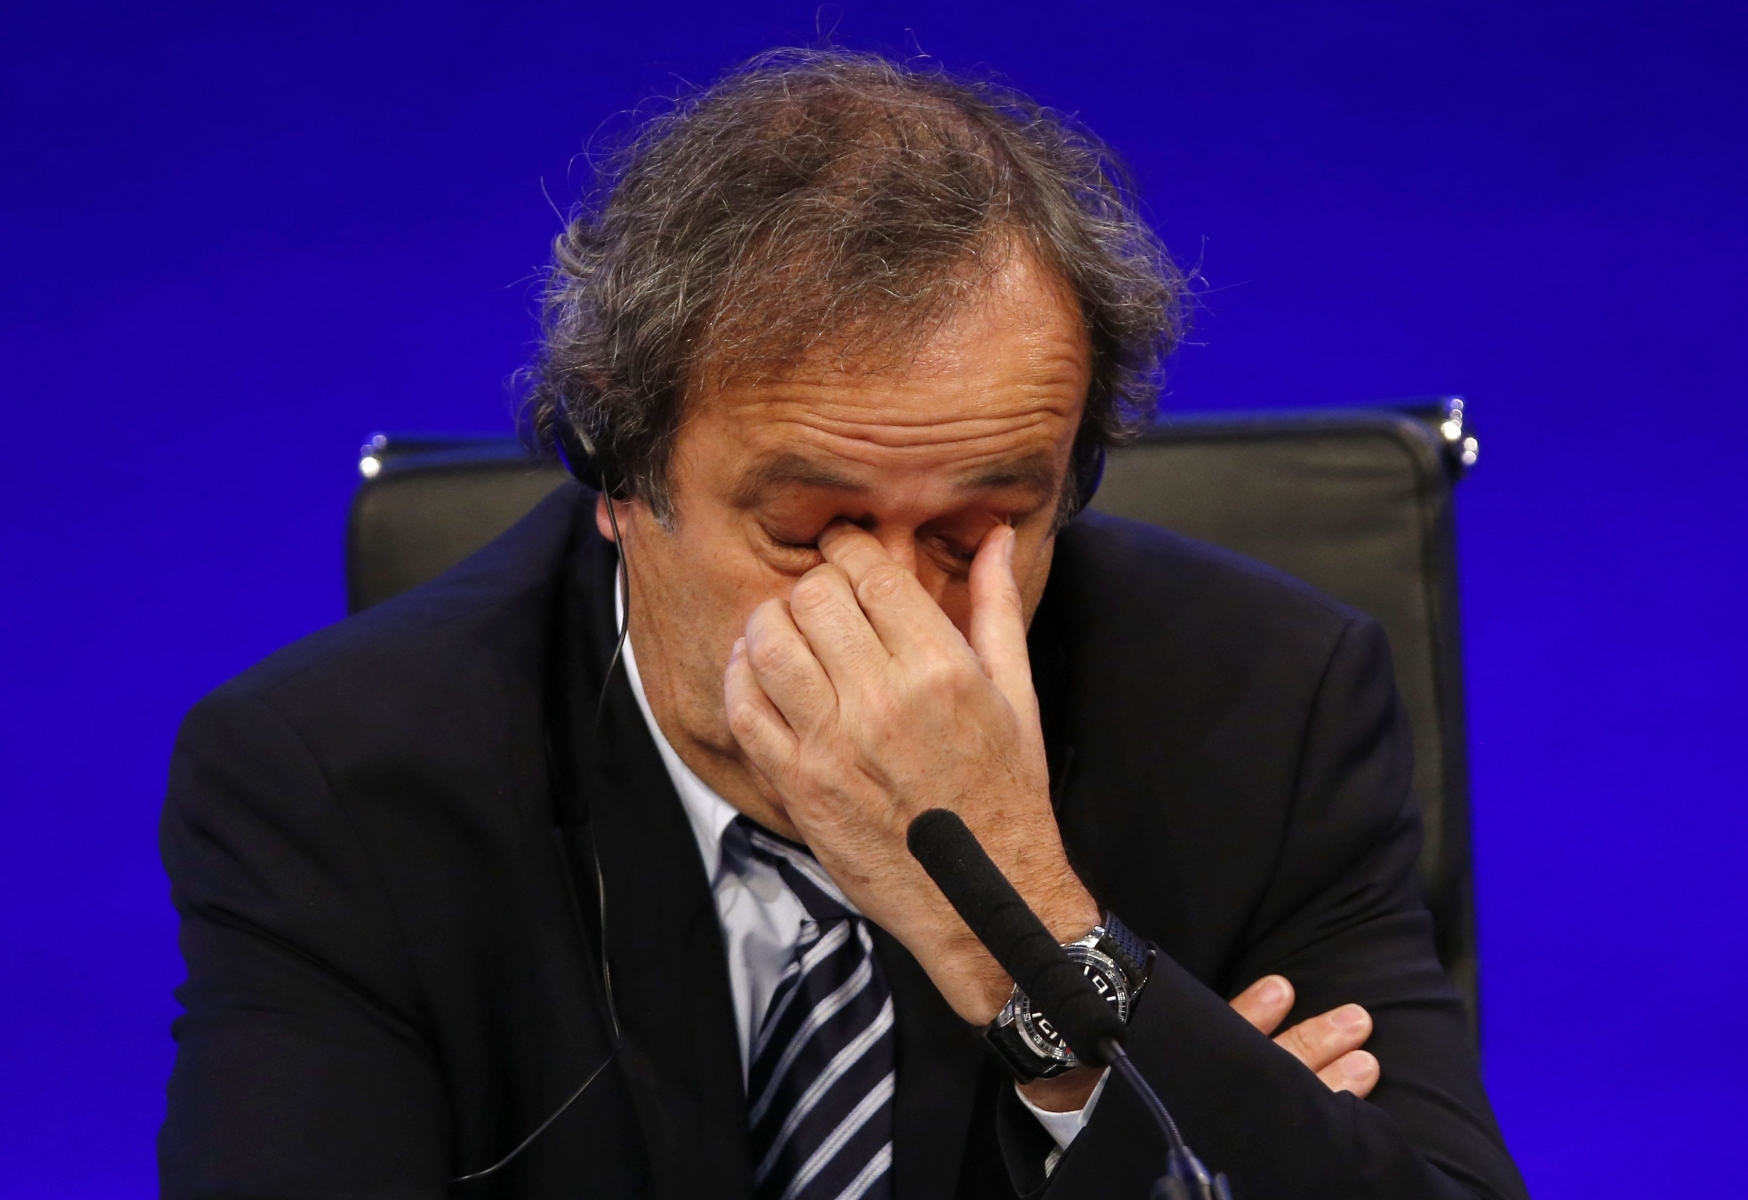 FILE - In this May 24, 2013 file photo UEFA President Michel Platini reacts as he speaks to members of the media at the end of the 37th Ordinary UEFA Congress in London. UEFA leaders were meeting Thursday Oct. 15, 2015 to decide whether to continue backing Michel Platini, with some not yet satisfied by his explanation for a payment that led to his 90-day FIFA suspension. (AP Photo/Sang Tan)